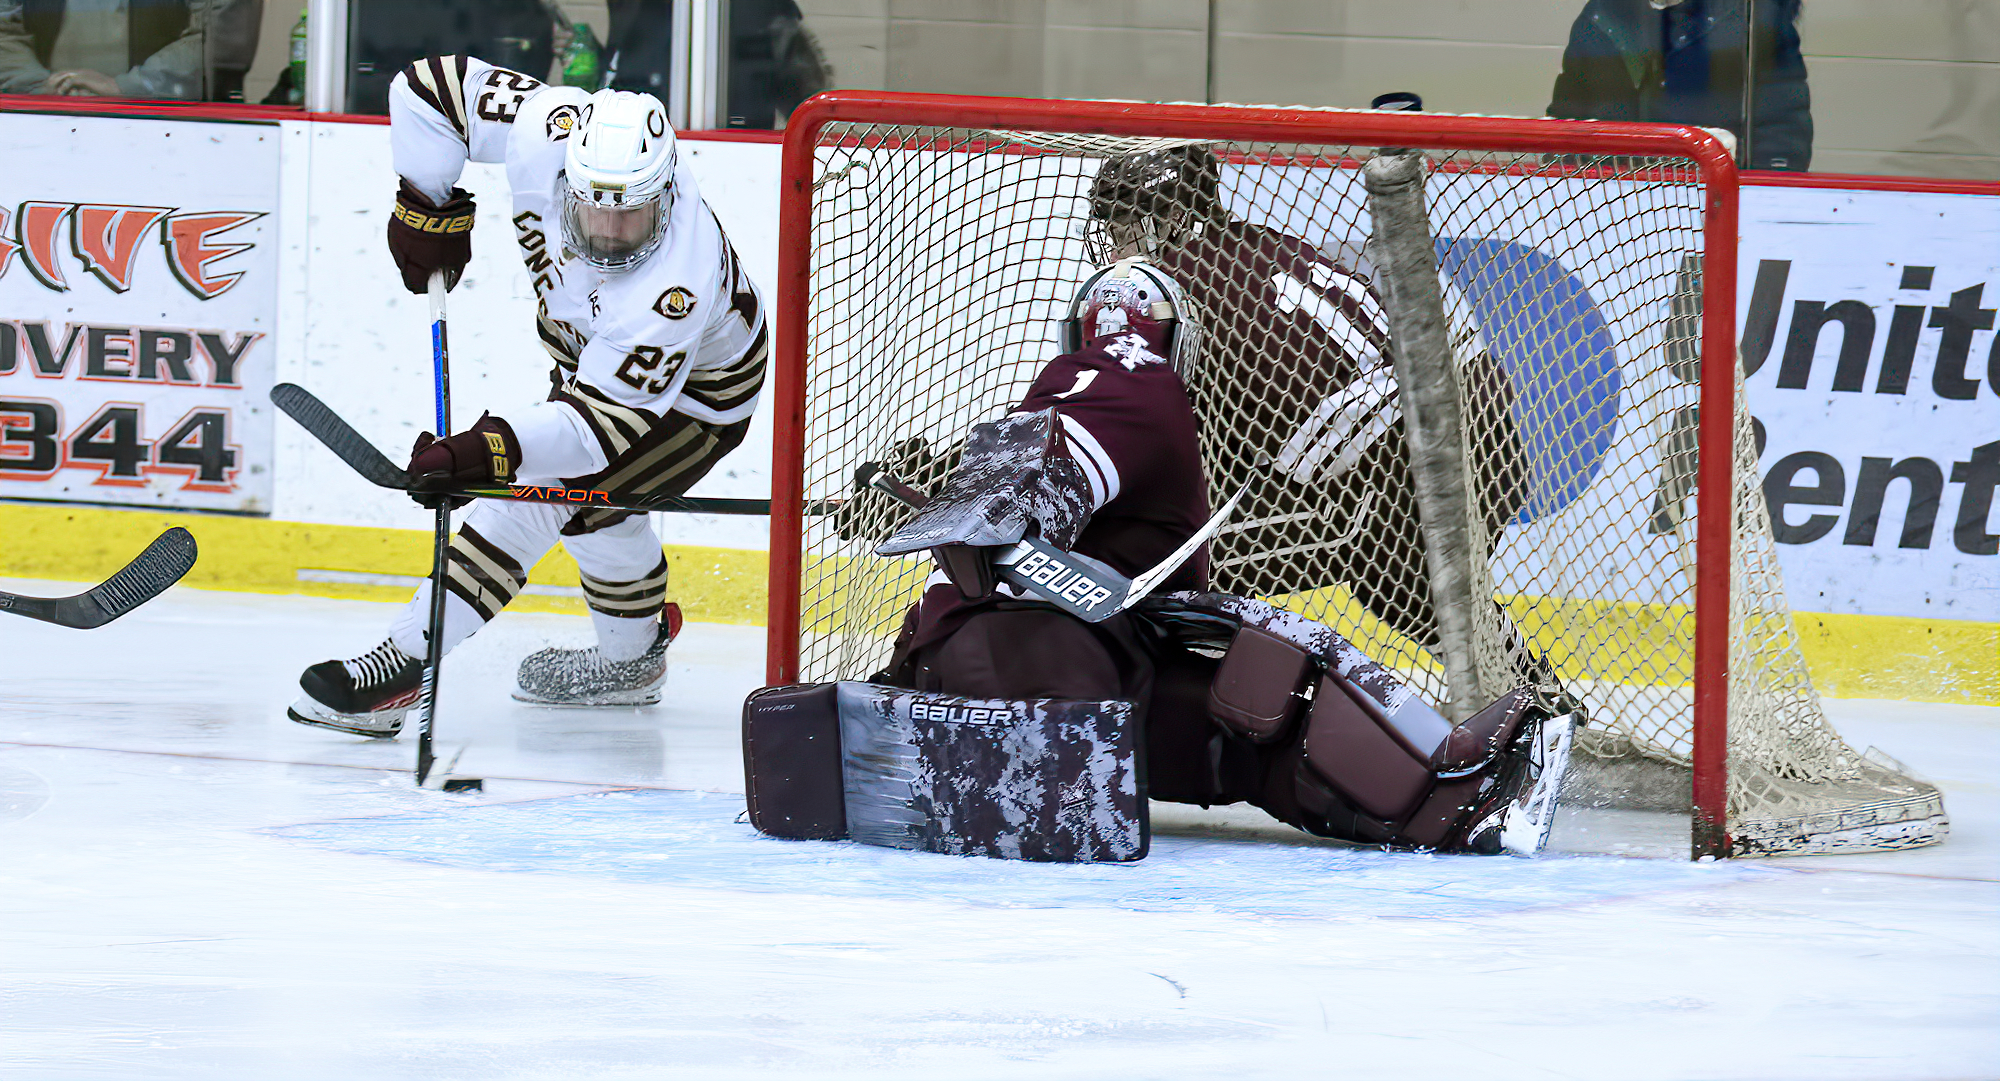 Cole O'Connell goes for the wraparound in the second period of the Cobbers 4-2 win against Augsburg. O'Connell scored the team's second goal.